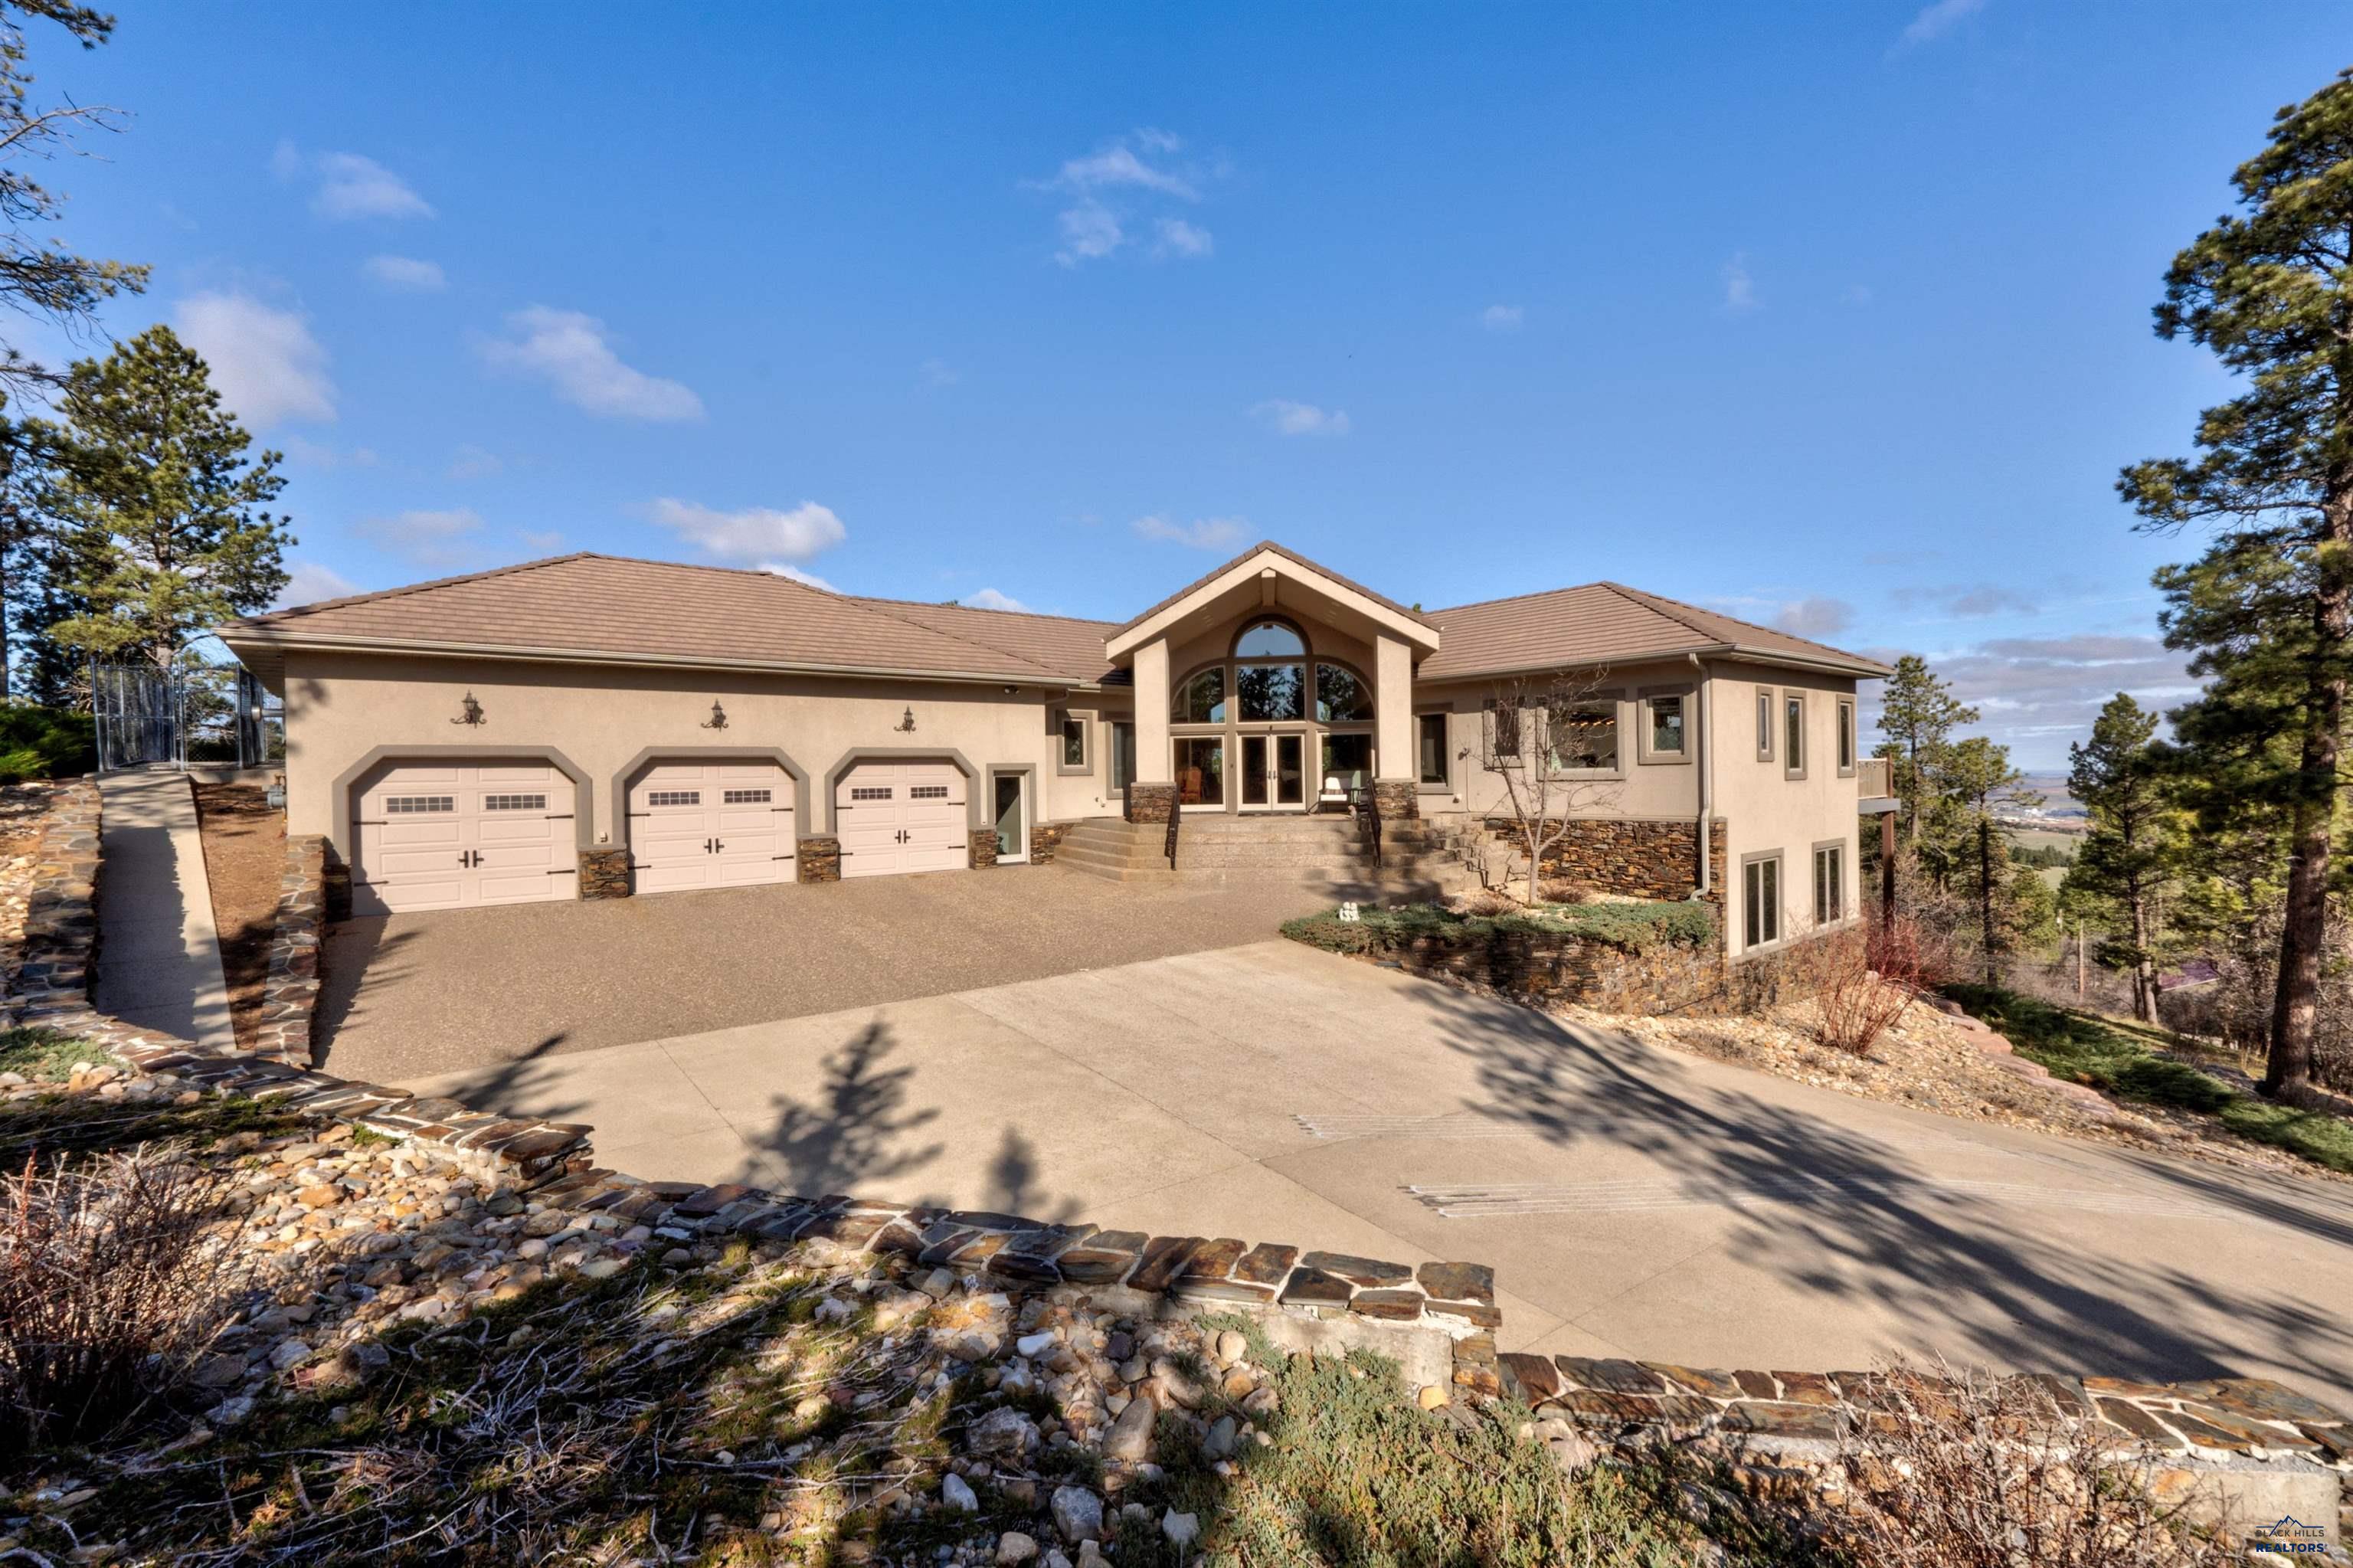 This awe inspiring property features intricate architecture with views of Spearfish. Just through the impressive glass front doors are the open living areas that feature vaulted ceilings, tall stone fireplace, extravagant windows with immaculate views & natural light. The kitchen is a culinary dream with expansive granite counter space, a prep sink, island, pantry, hardwood cabinetry, and high end appliances. Off the living room is the wrap around deck that provides views of this incredible property with natural rocks and low maintenance landscaping. The main level features a large primary bedroom with 2 walk-in closets and a stunning bathroom that is sure to impress, a dedicated office with built-in shelving and patio access, a full bathroom, and laundry area. The lower level has 3 large bedrooms, 2 full bathrooms, a multipurpose room, which is an entertainer's dream and includes a wet bar, short throw projector/screen, game room, and an additional room to use as your heart desires.